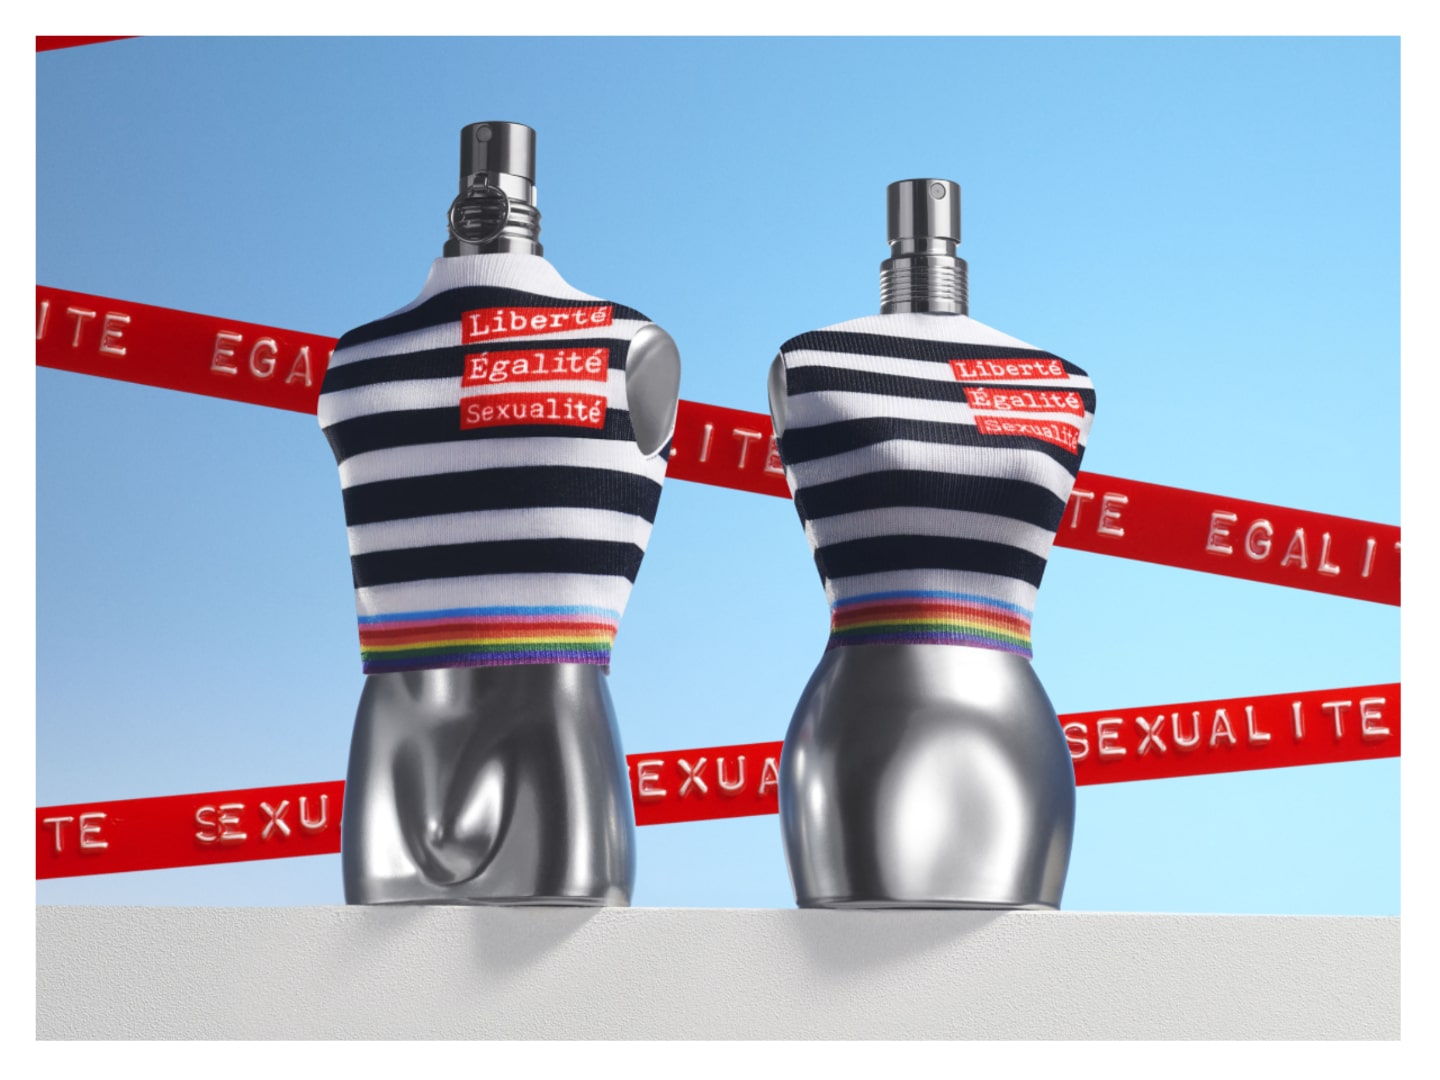 Jean Paul Gaultier releases limited edition Pride perfume bottles